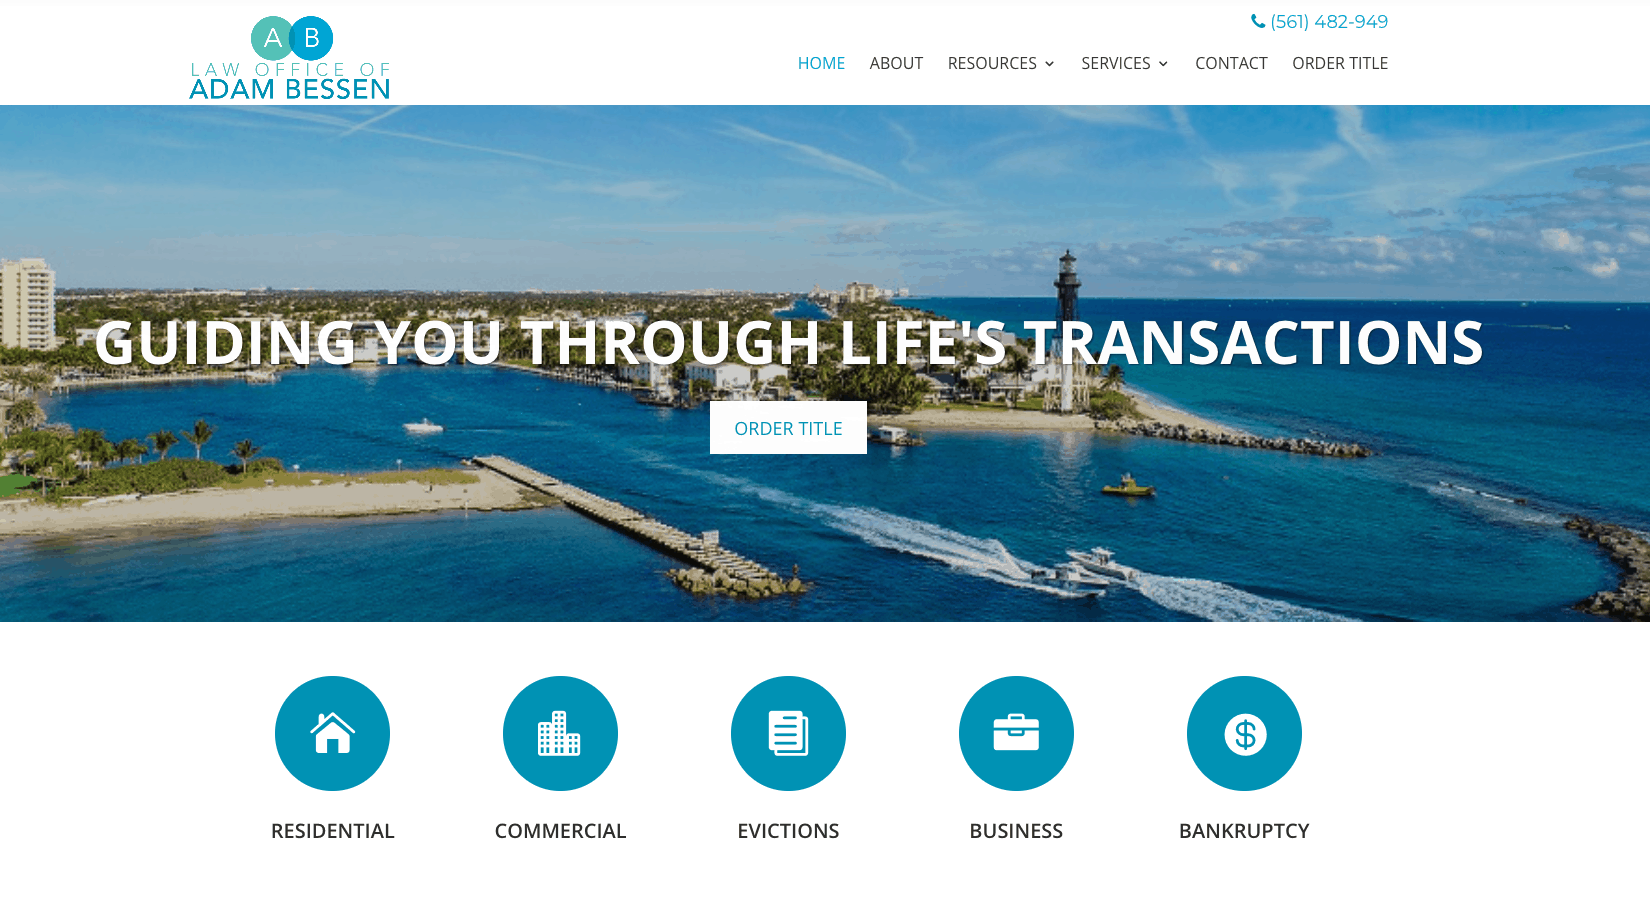 screenshot of a law website's homepage featuring an image of a body of water